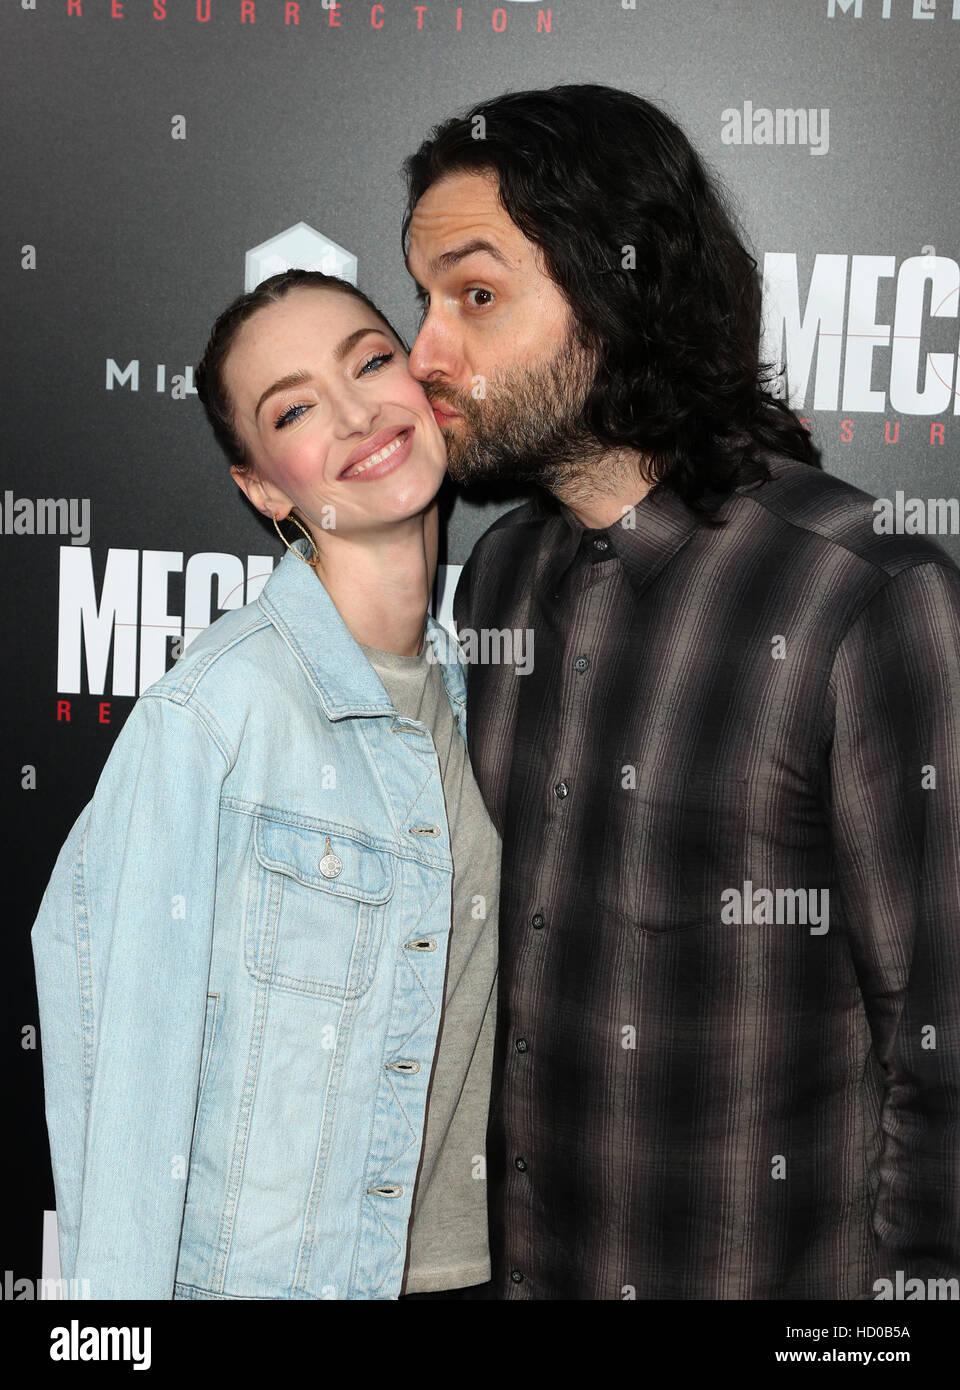 Cassi Colvin And Chris Delia High Resolution Stock Photography And Images Alamy